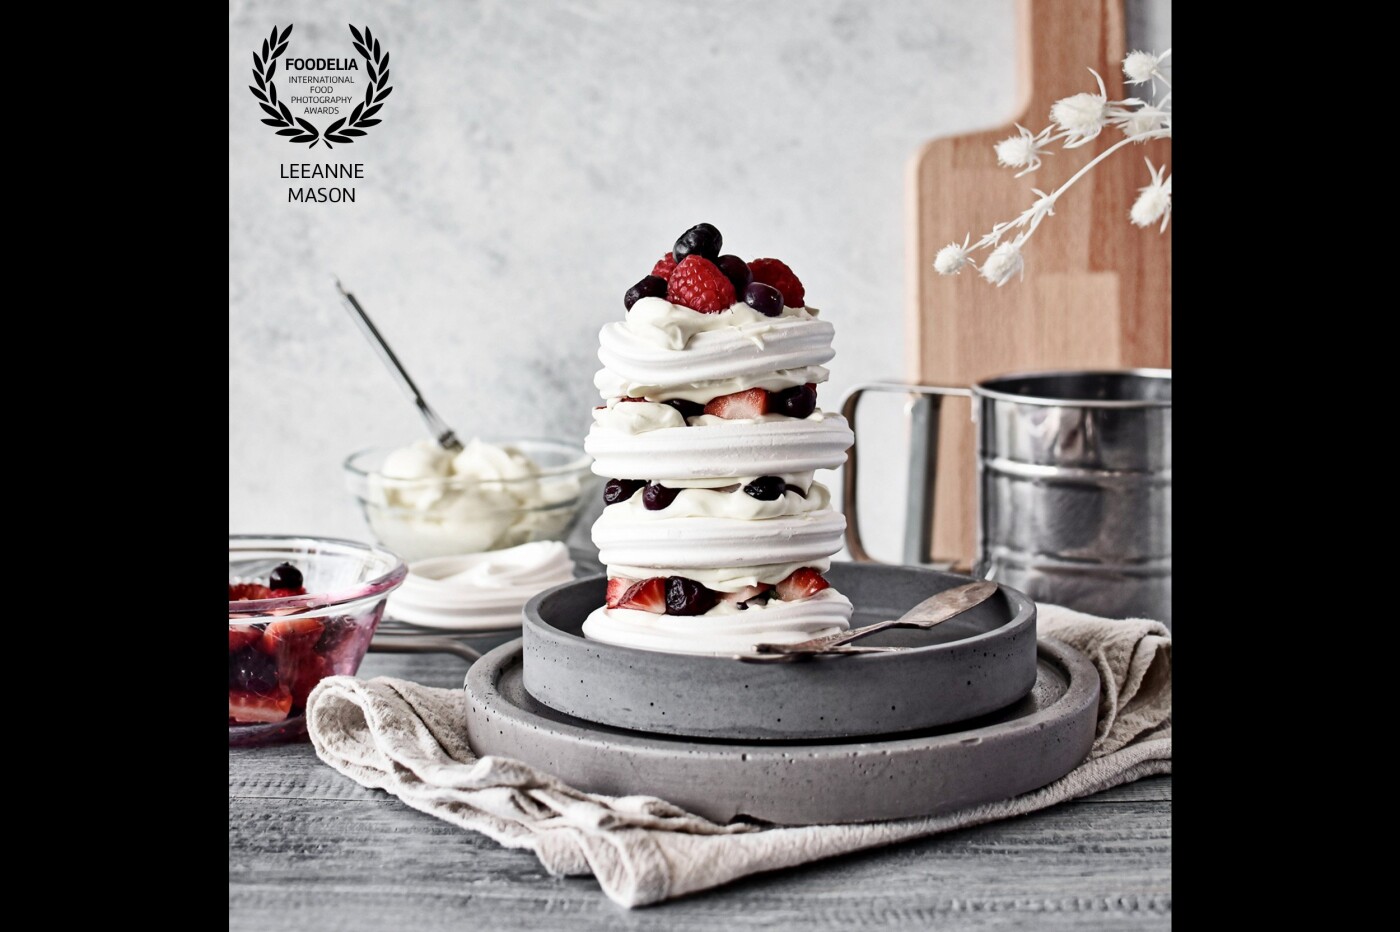 I believe storytelling is truly important in food photography.  When constructing this Pavlova tower, the detail of the meringues and berries were beautiful as they were so when I built the background layers I wanted to ensure the colours and composition did not distract from the main subject, rather draw your eye to it.